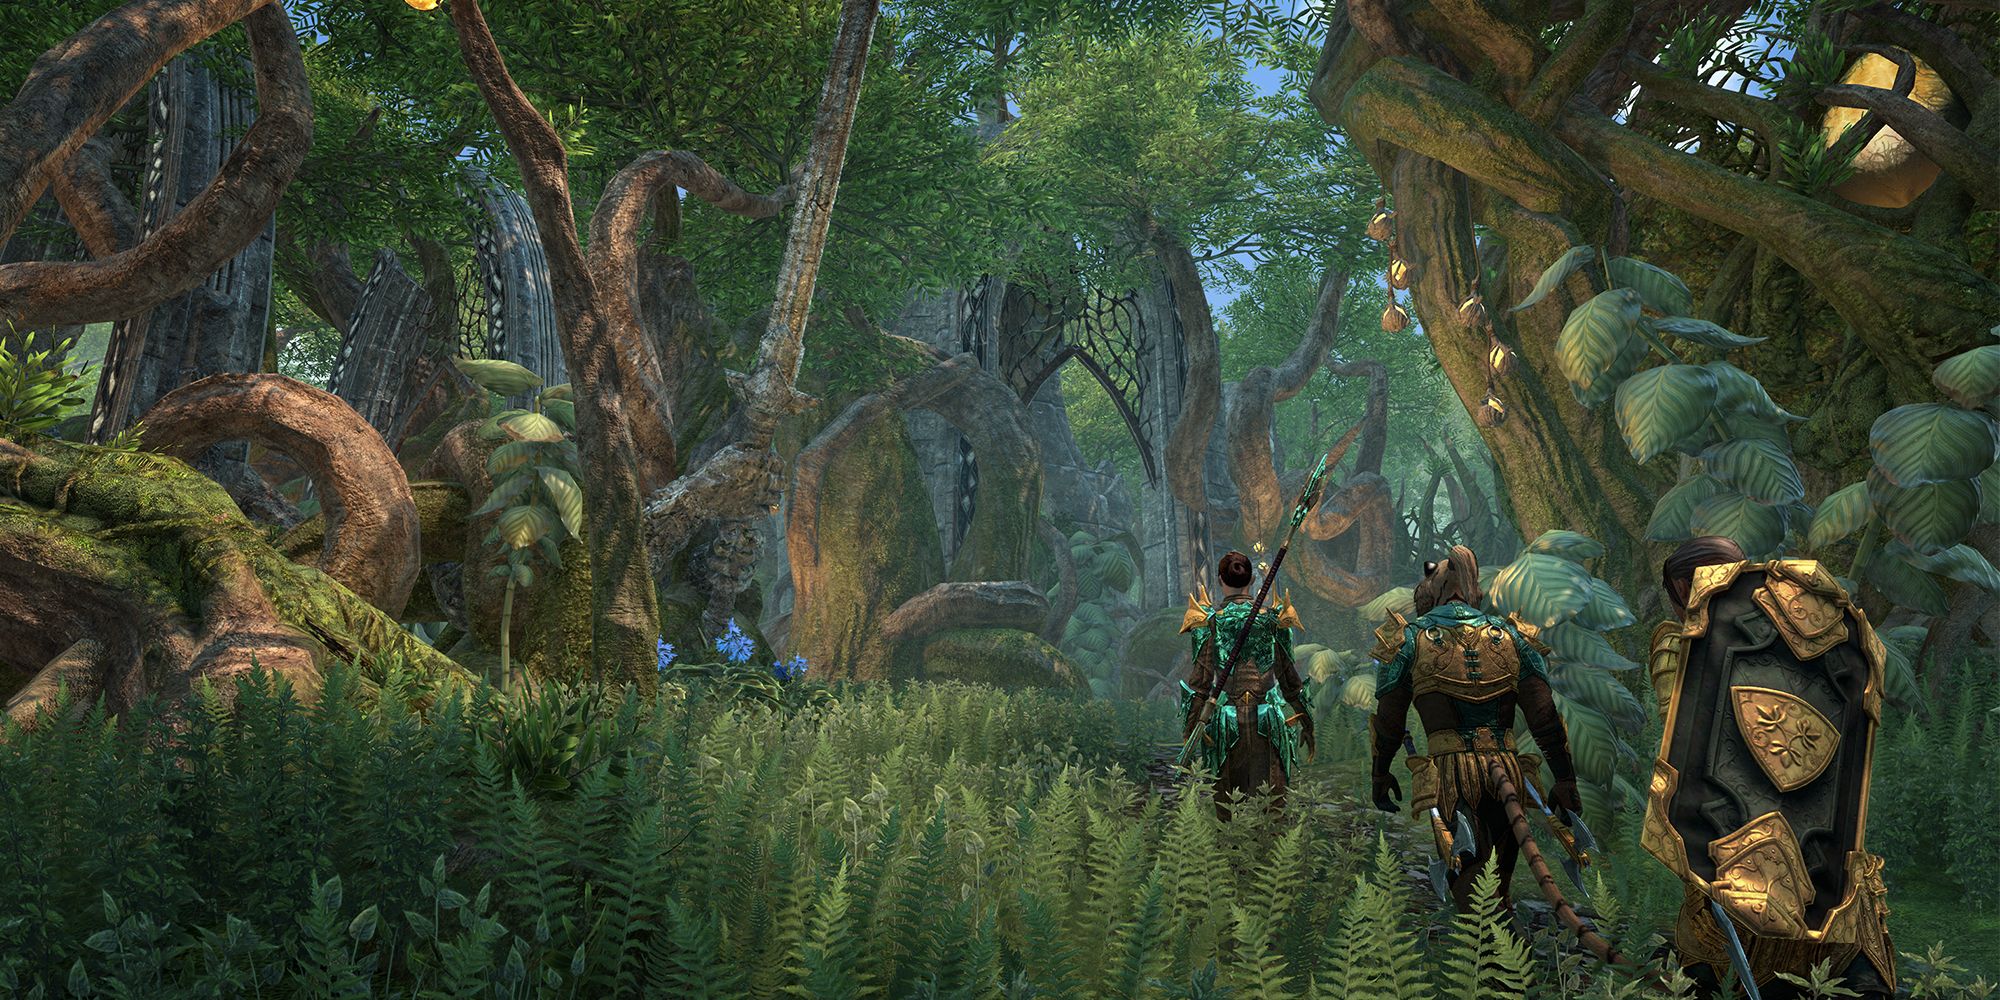 ESO Gold Road screenshot of adventurers entering an ayleid ruin covered in jungle trees